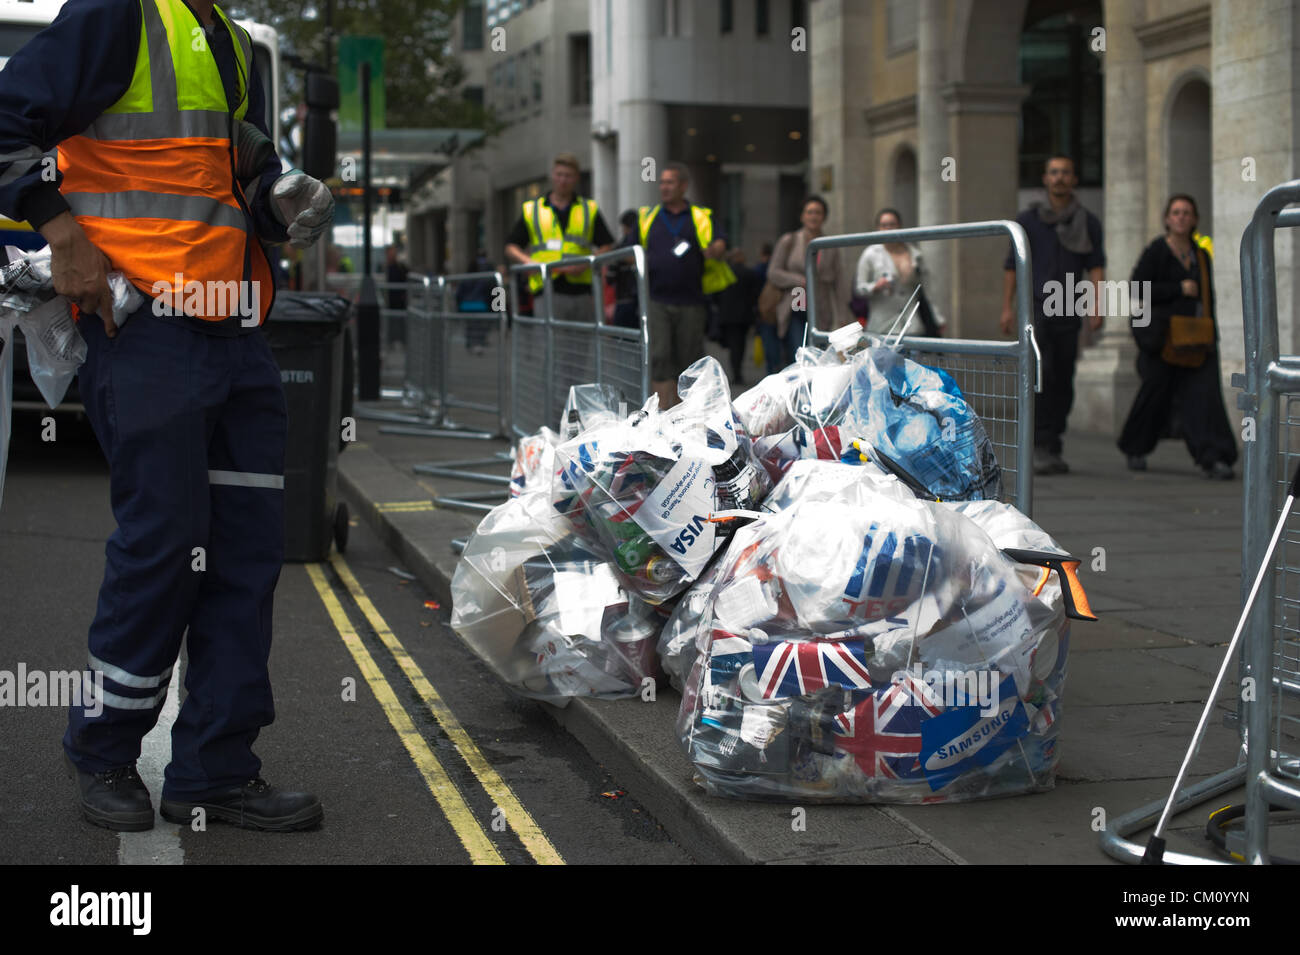 The Strand, London, UK. September 10, 2012 A Westminster Council worker clears up debris after the Olympic and Paralympic Victory Parade has passed through. Stock Photo